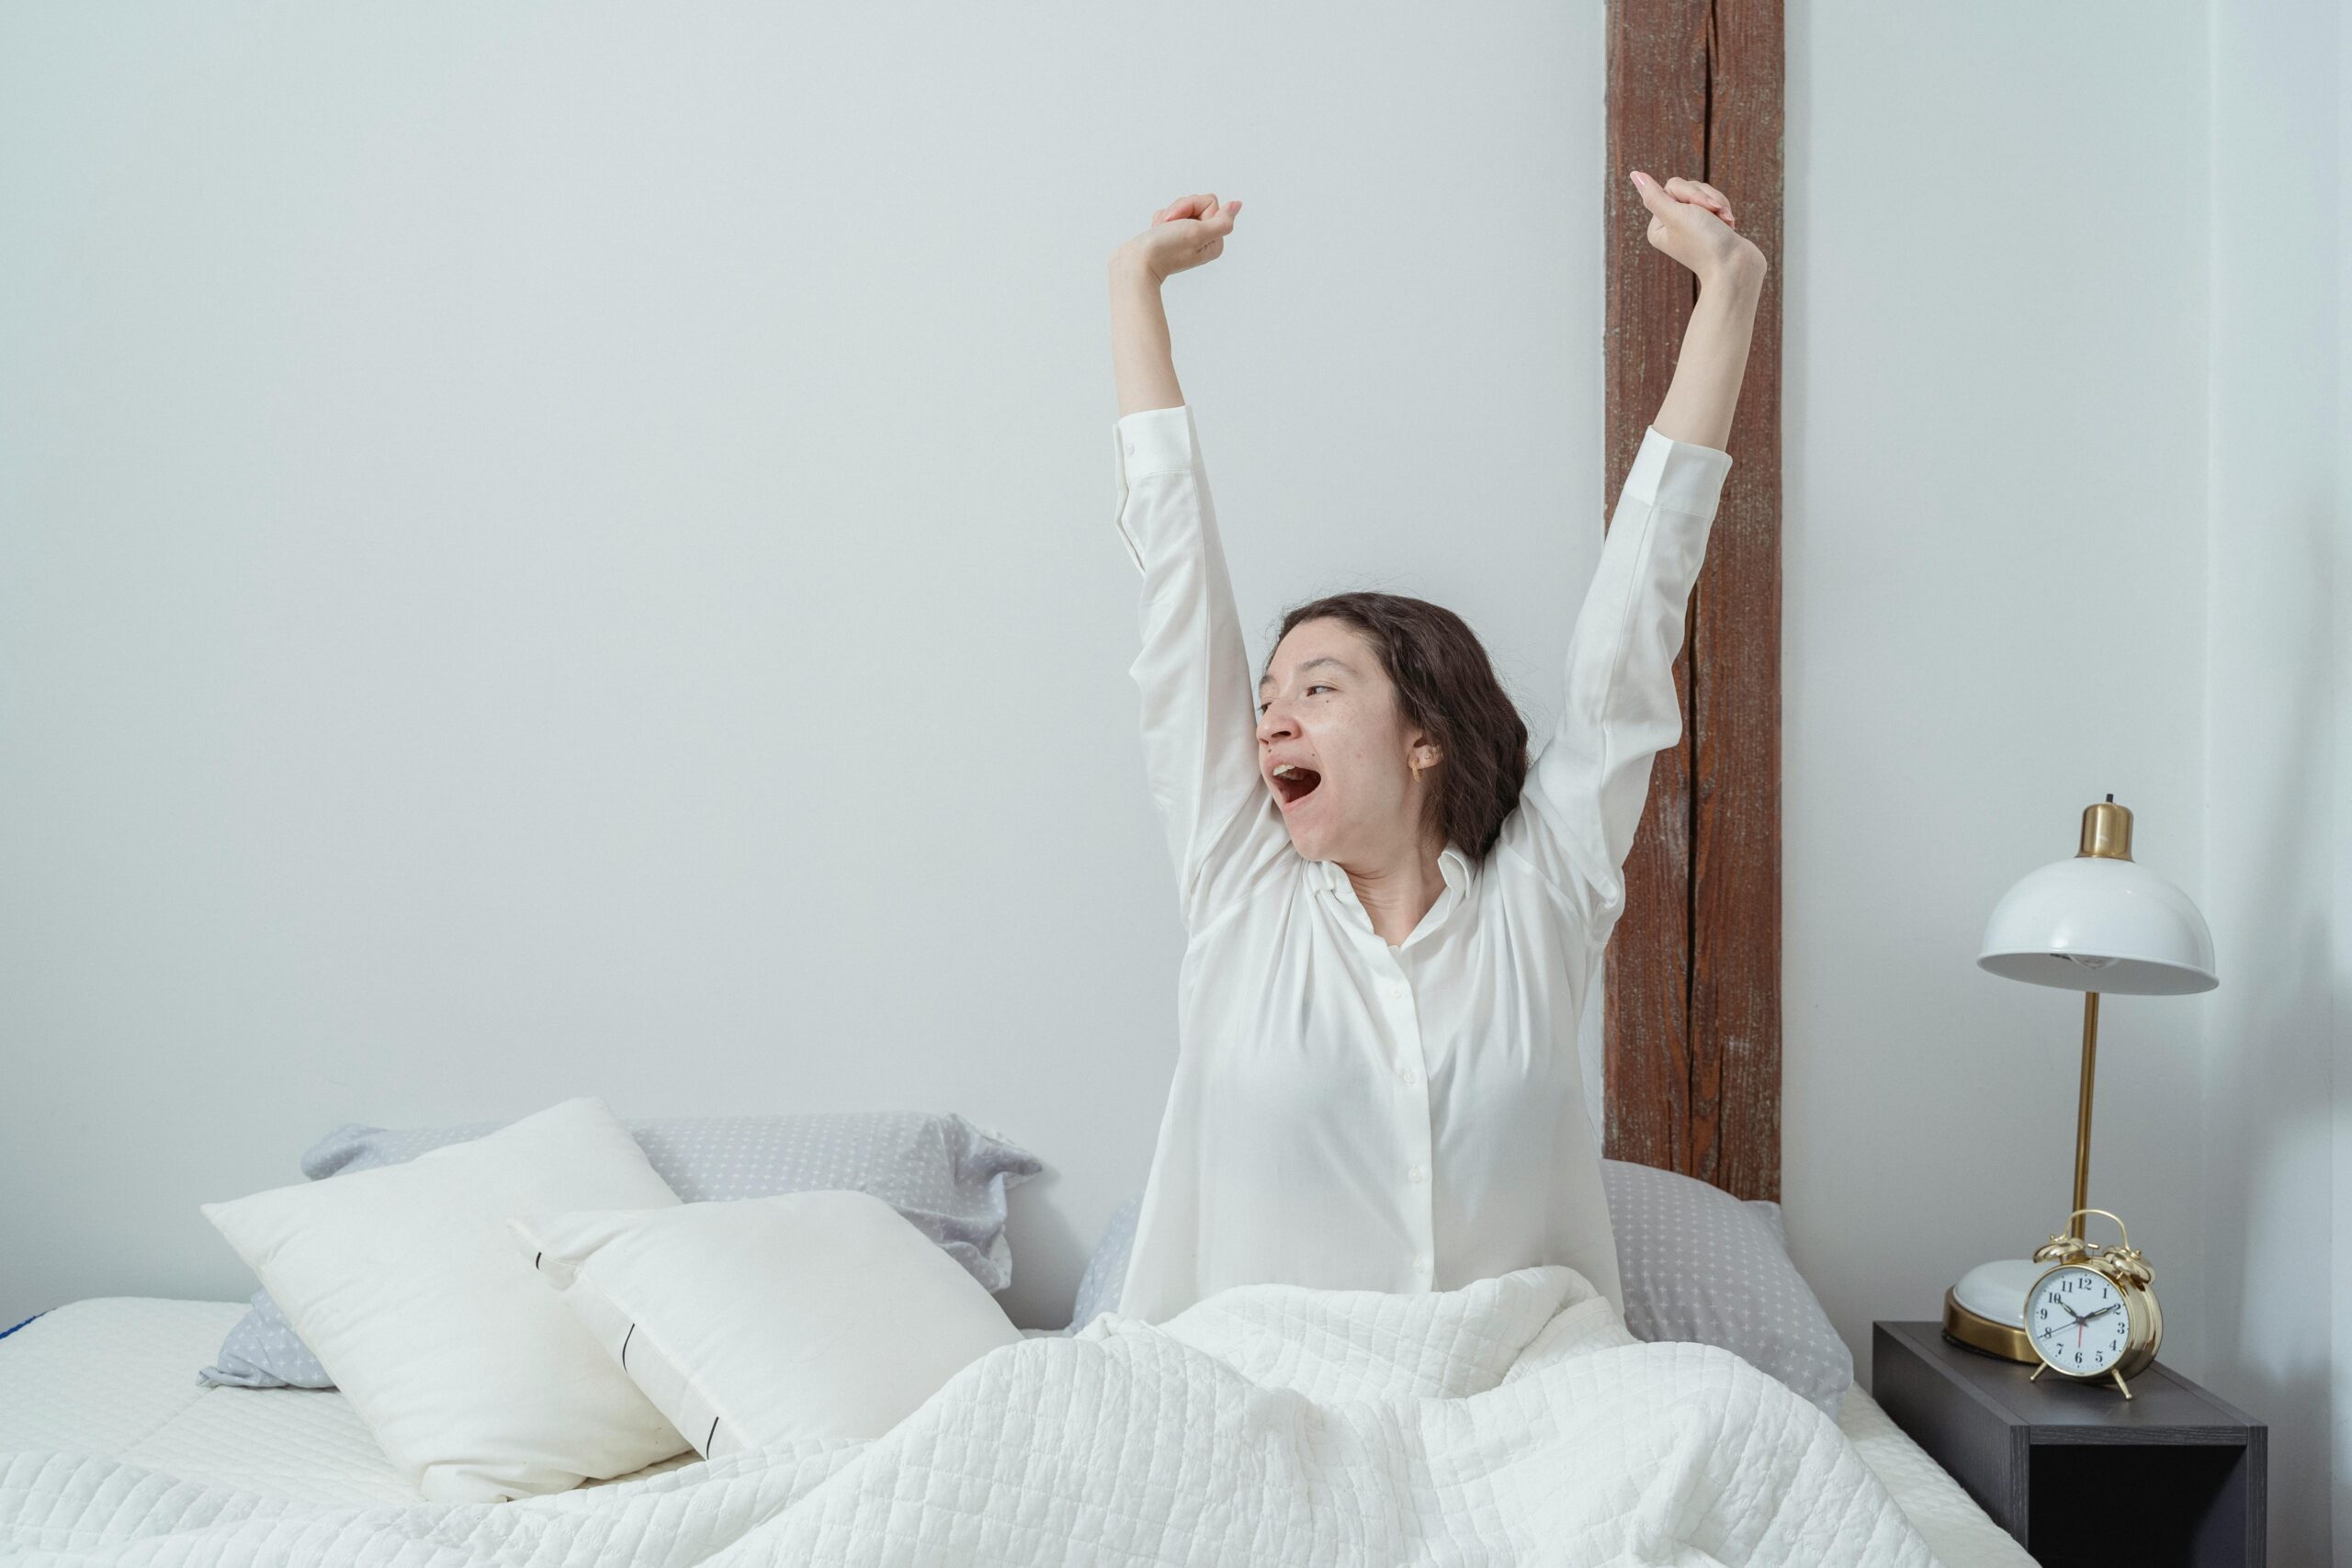 Woman sits in bed stretching and yawning